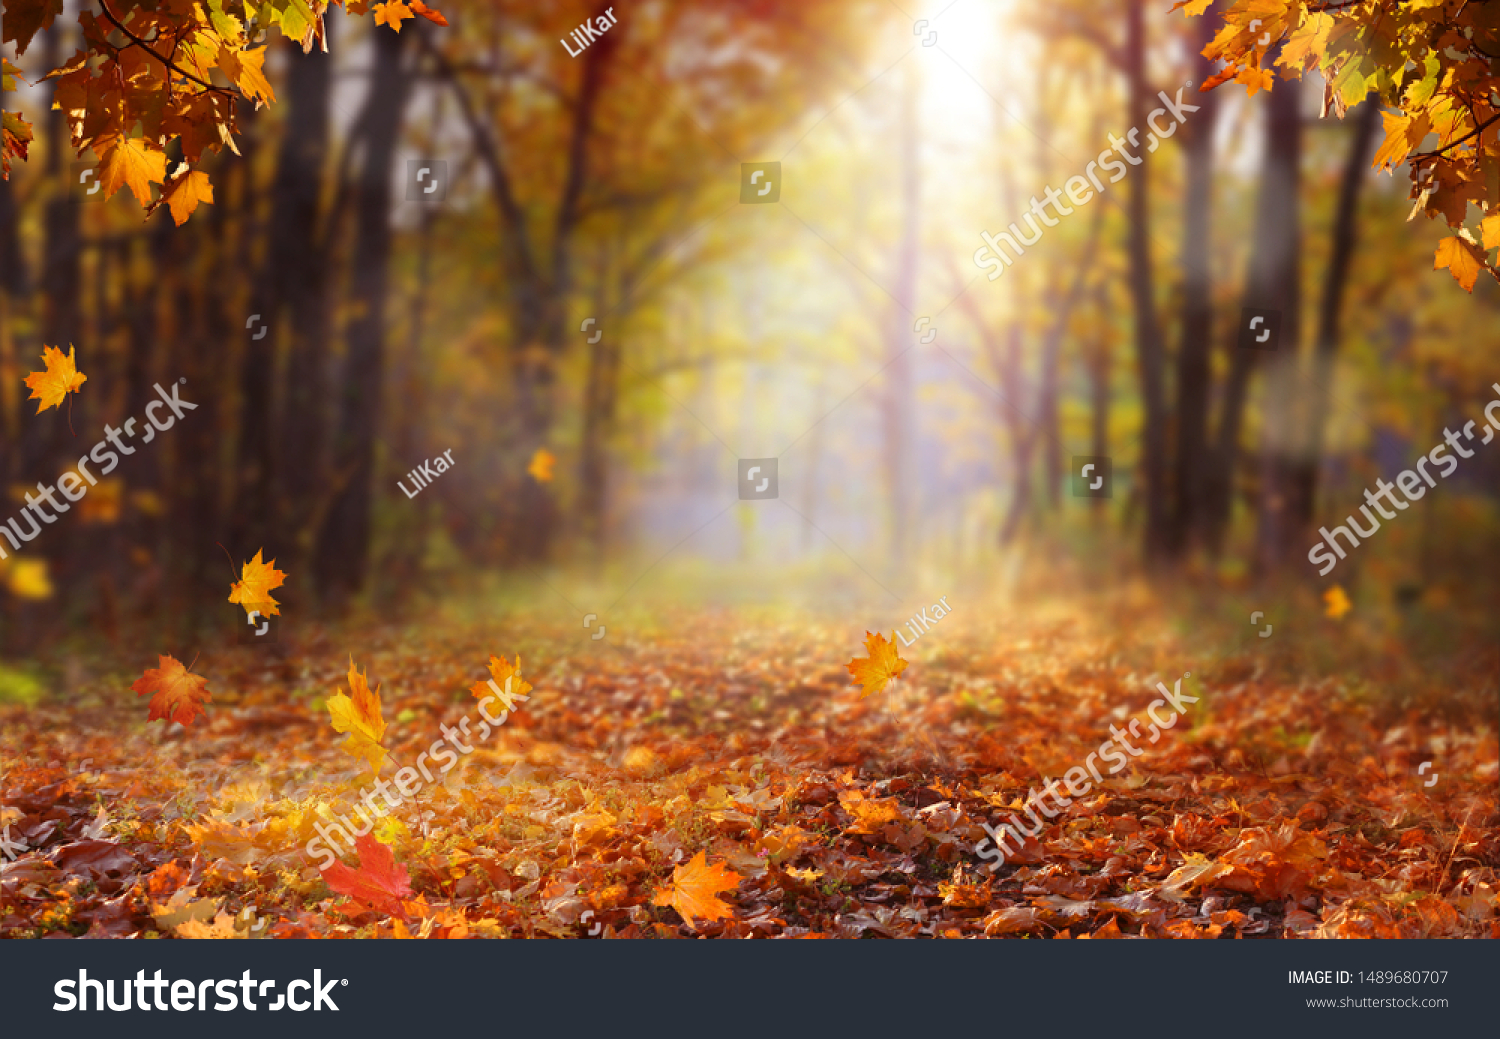 Beautiful autumn landscape with yellow trees and sun. Colorful foliage in the park. Falling  leaves natural background .Autumn season concept #1489680707